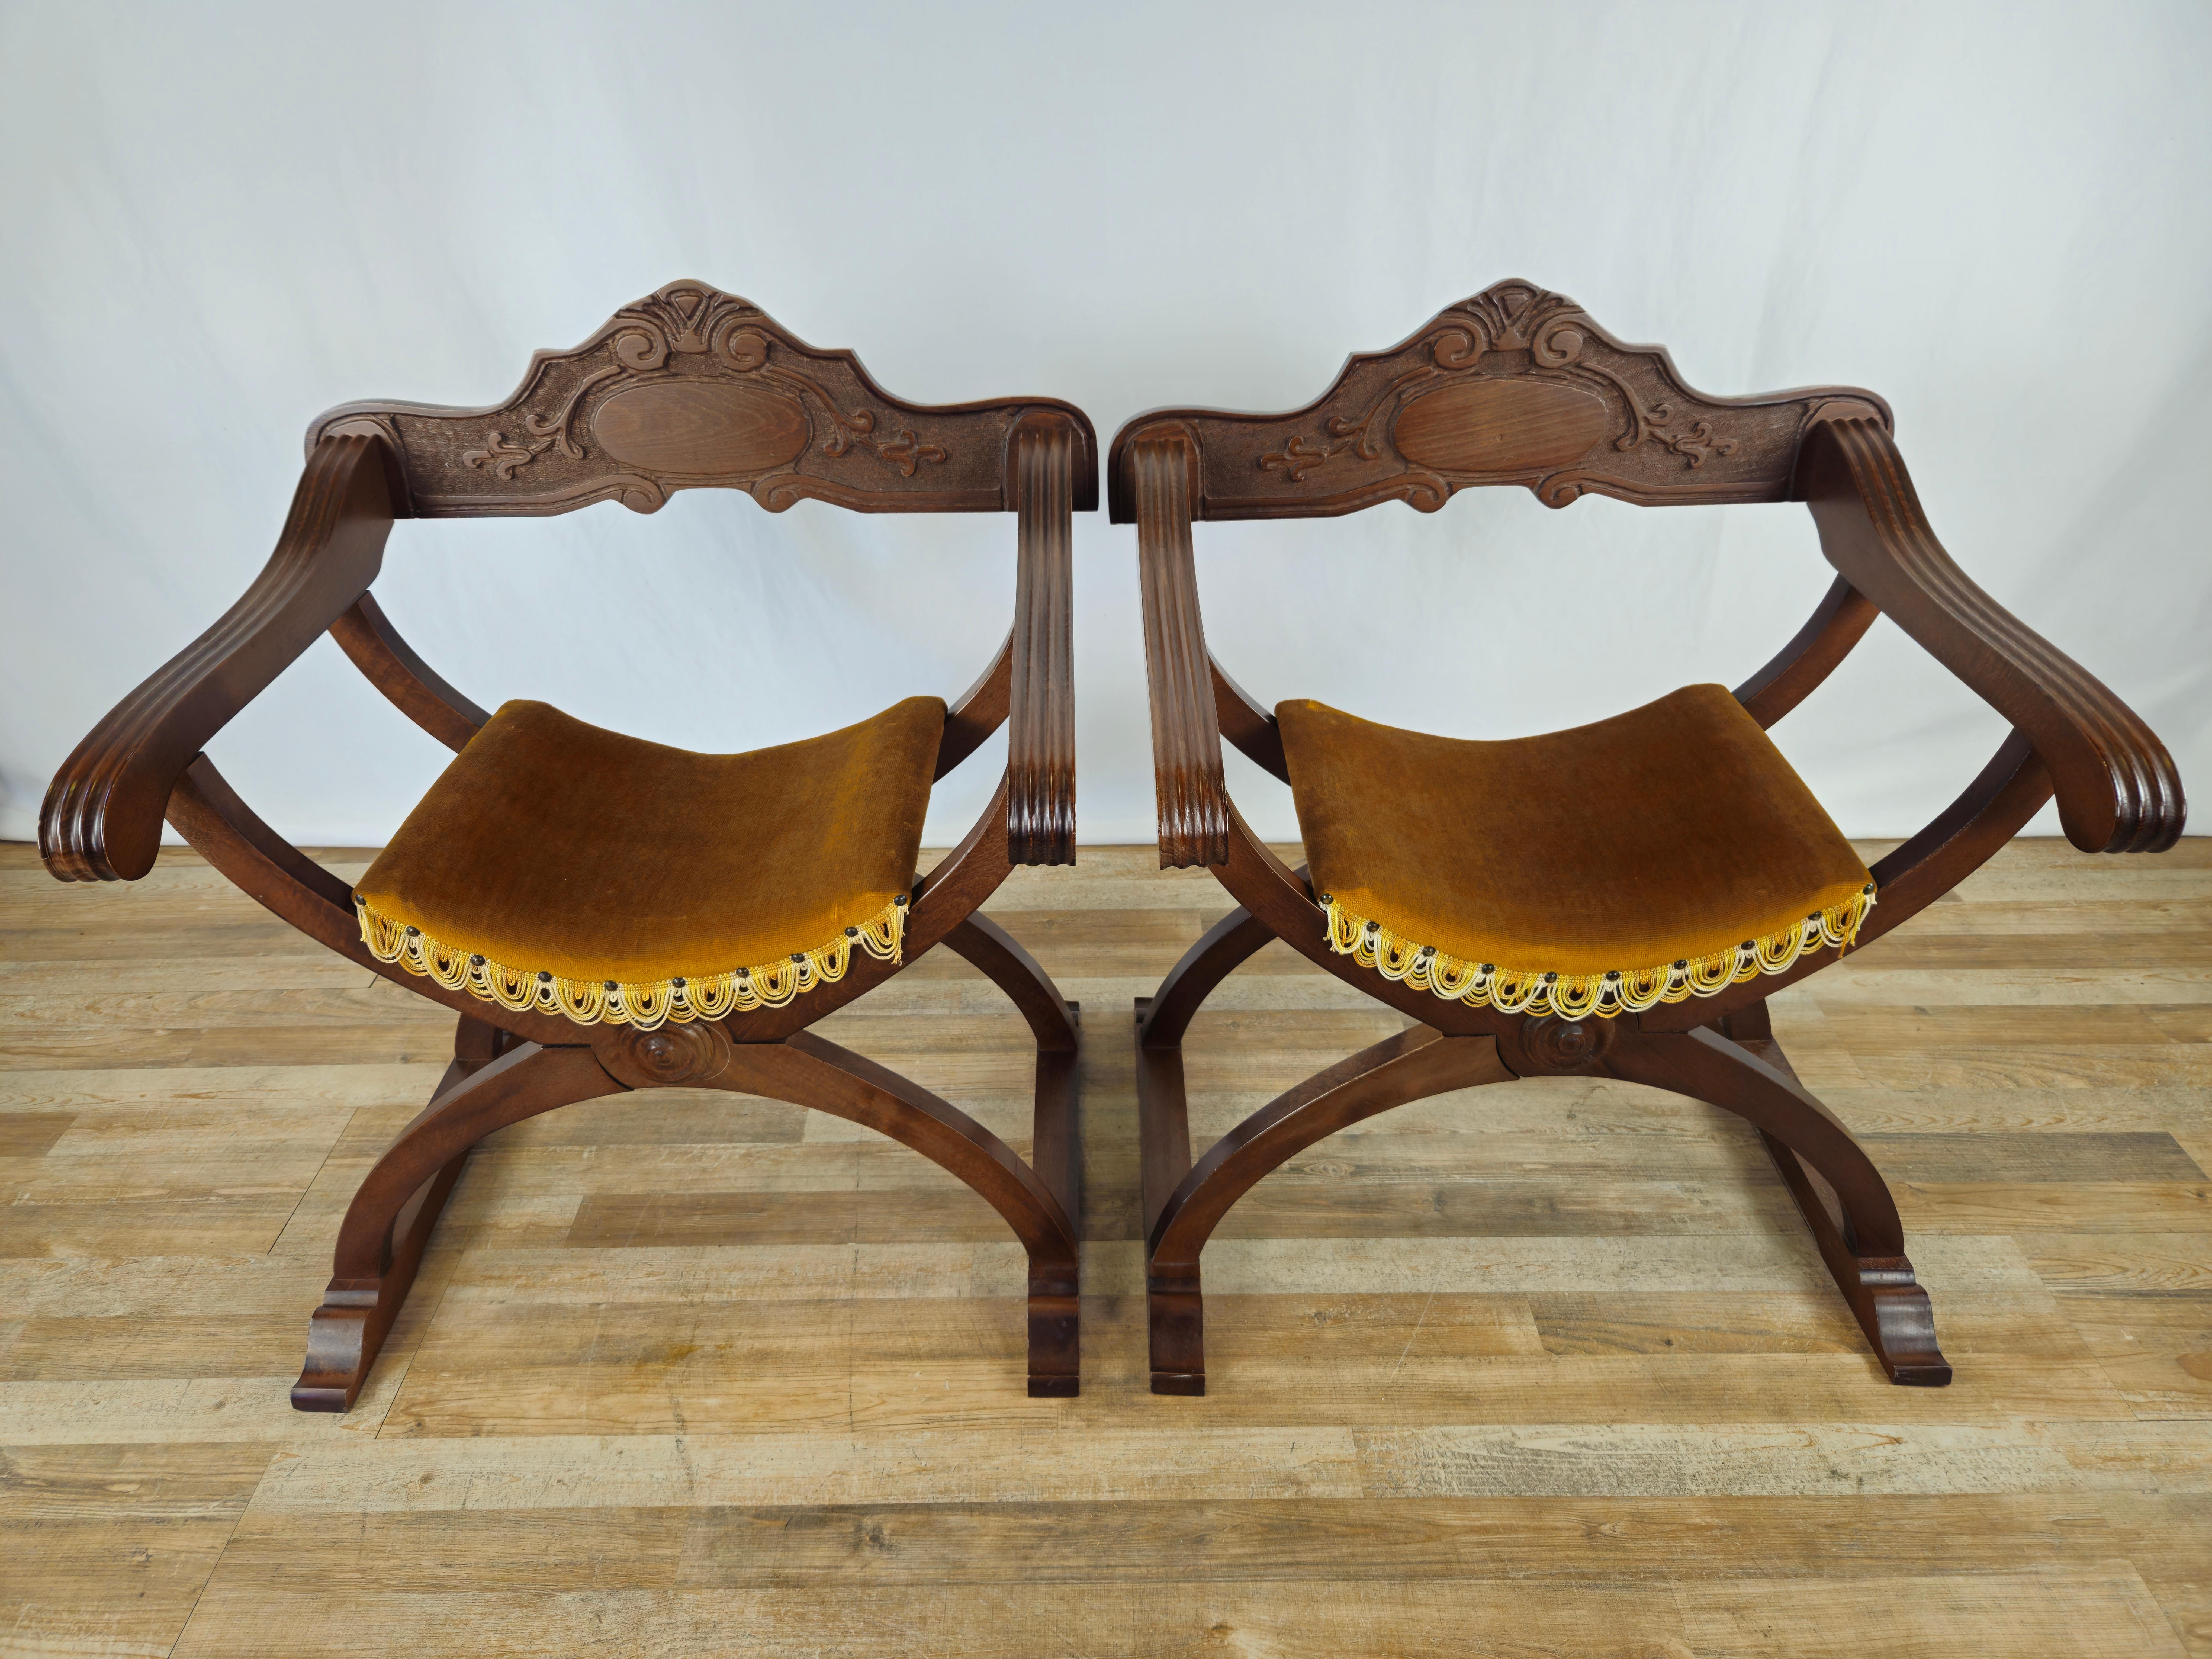 Pair of Savonarola model chairs in walnut wood with upholstered seat in original fabric of the period.

The chairs have a carved backrest attached with two screws at the back for removal and eventual folding for storage.

Normal signs due to age and